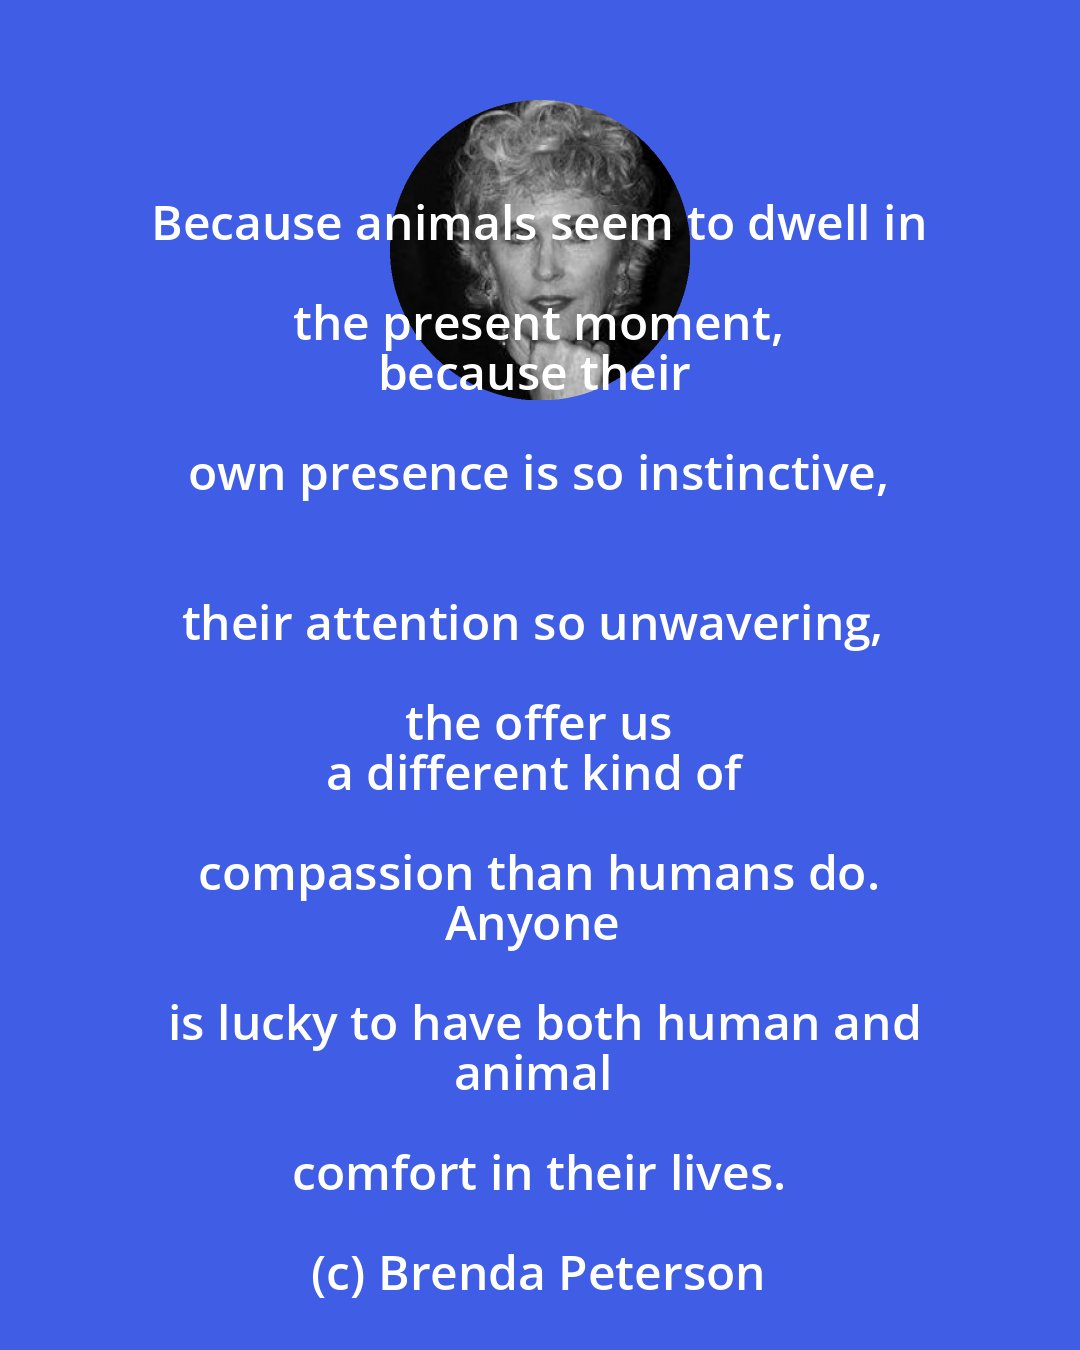 Brenda Peterson: Because animals seem to dwell in the present moment, 
because their own presence is so instinctive, 
their attention so unwavering, the offer us 
a different kind of compassion than humans do. 
Anyone is lucky to have both human and
animal comfort in their lives.